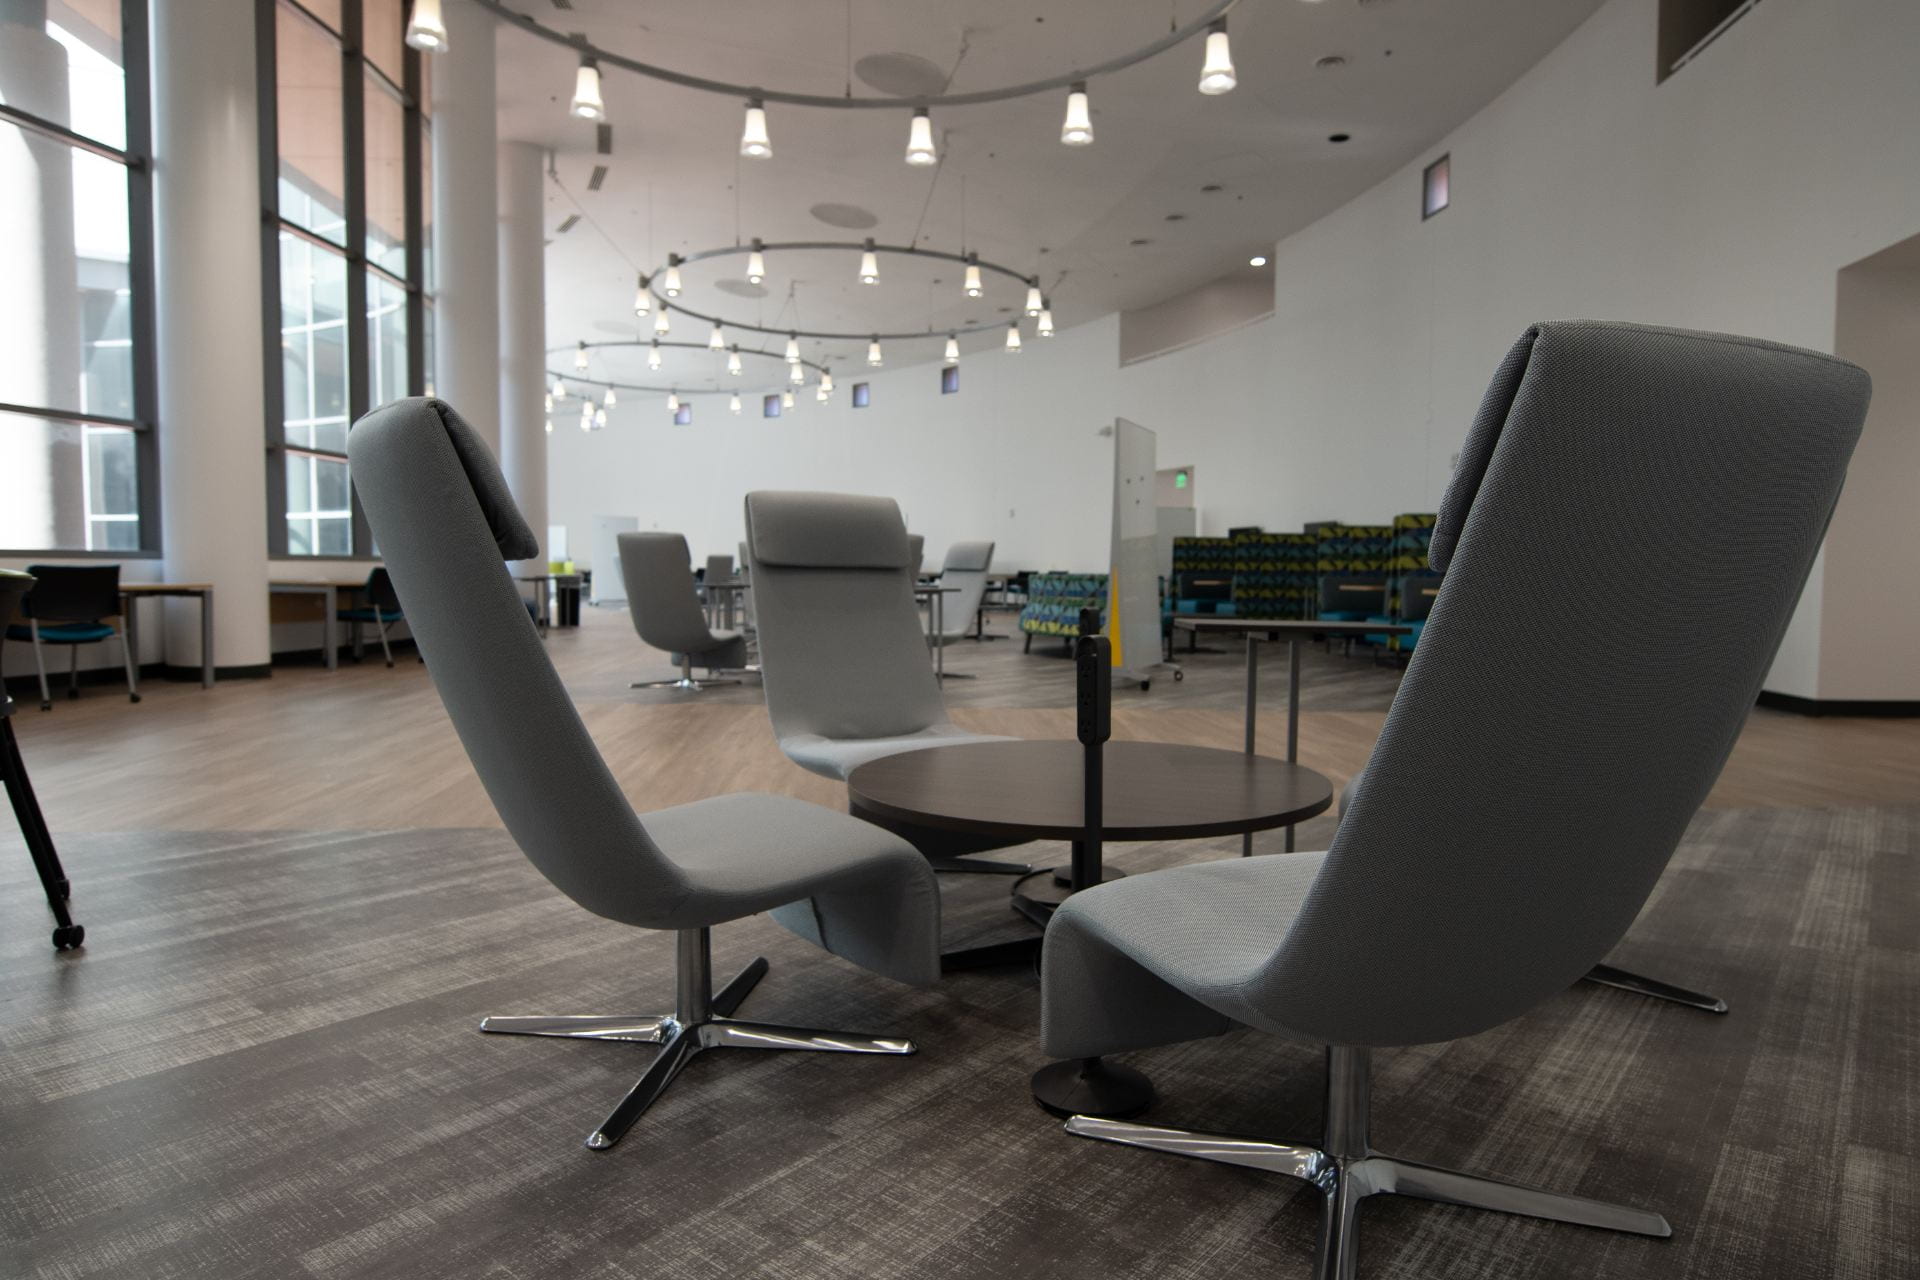 Lounge in the Student Excellence Center with an assortment of chairs & tables